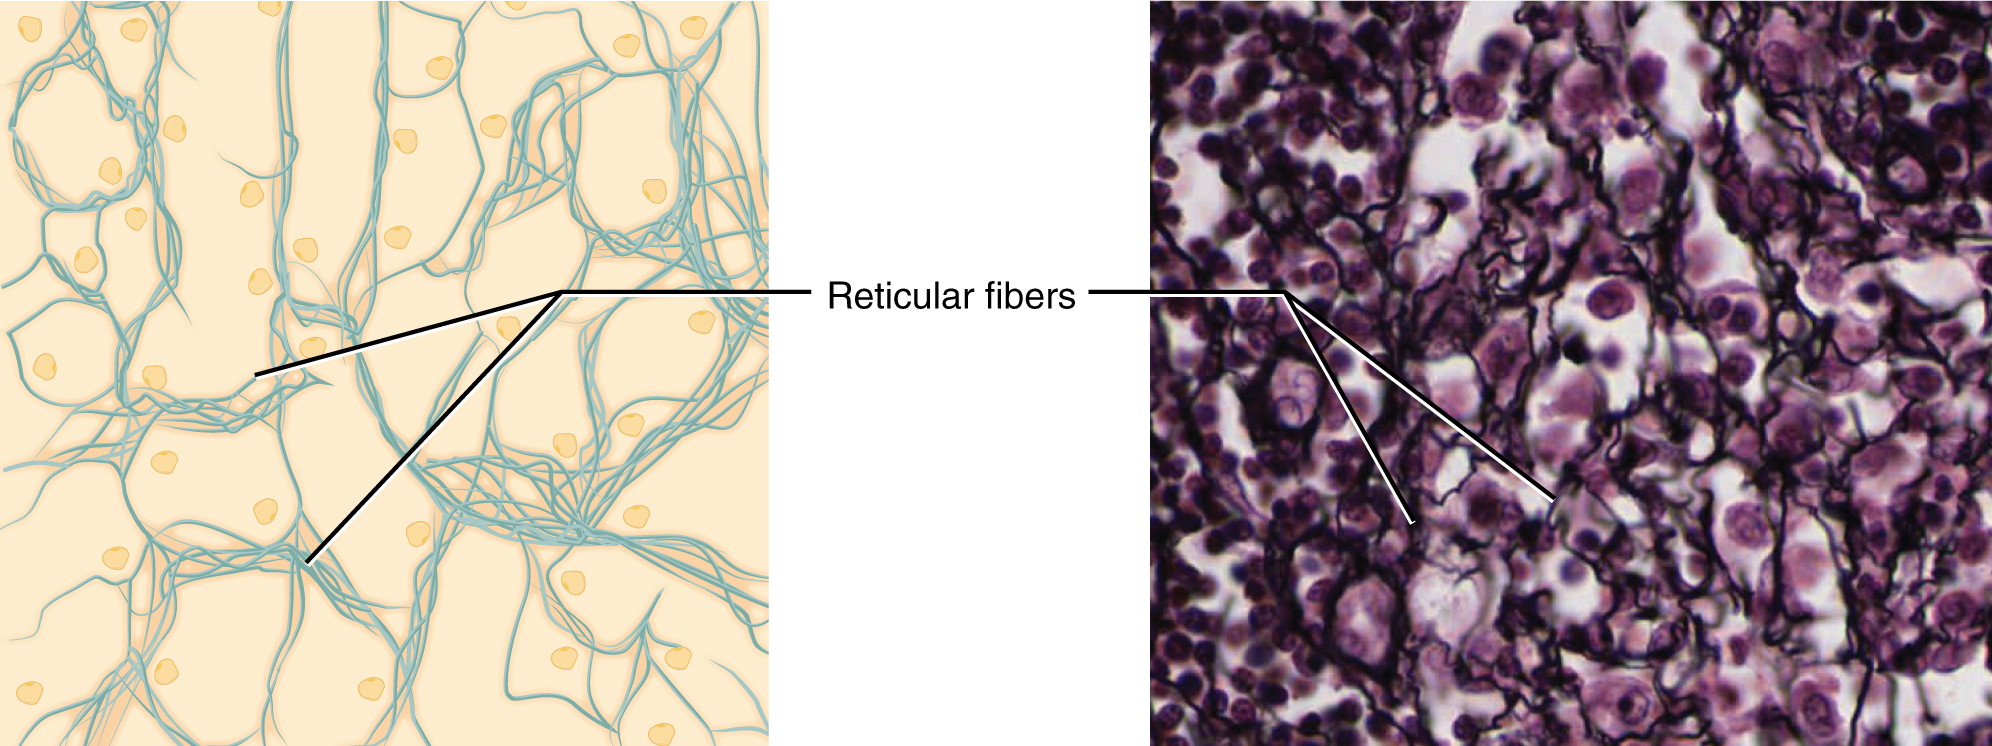 reticular tissue drawing and as viewed under the microscope